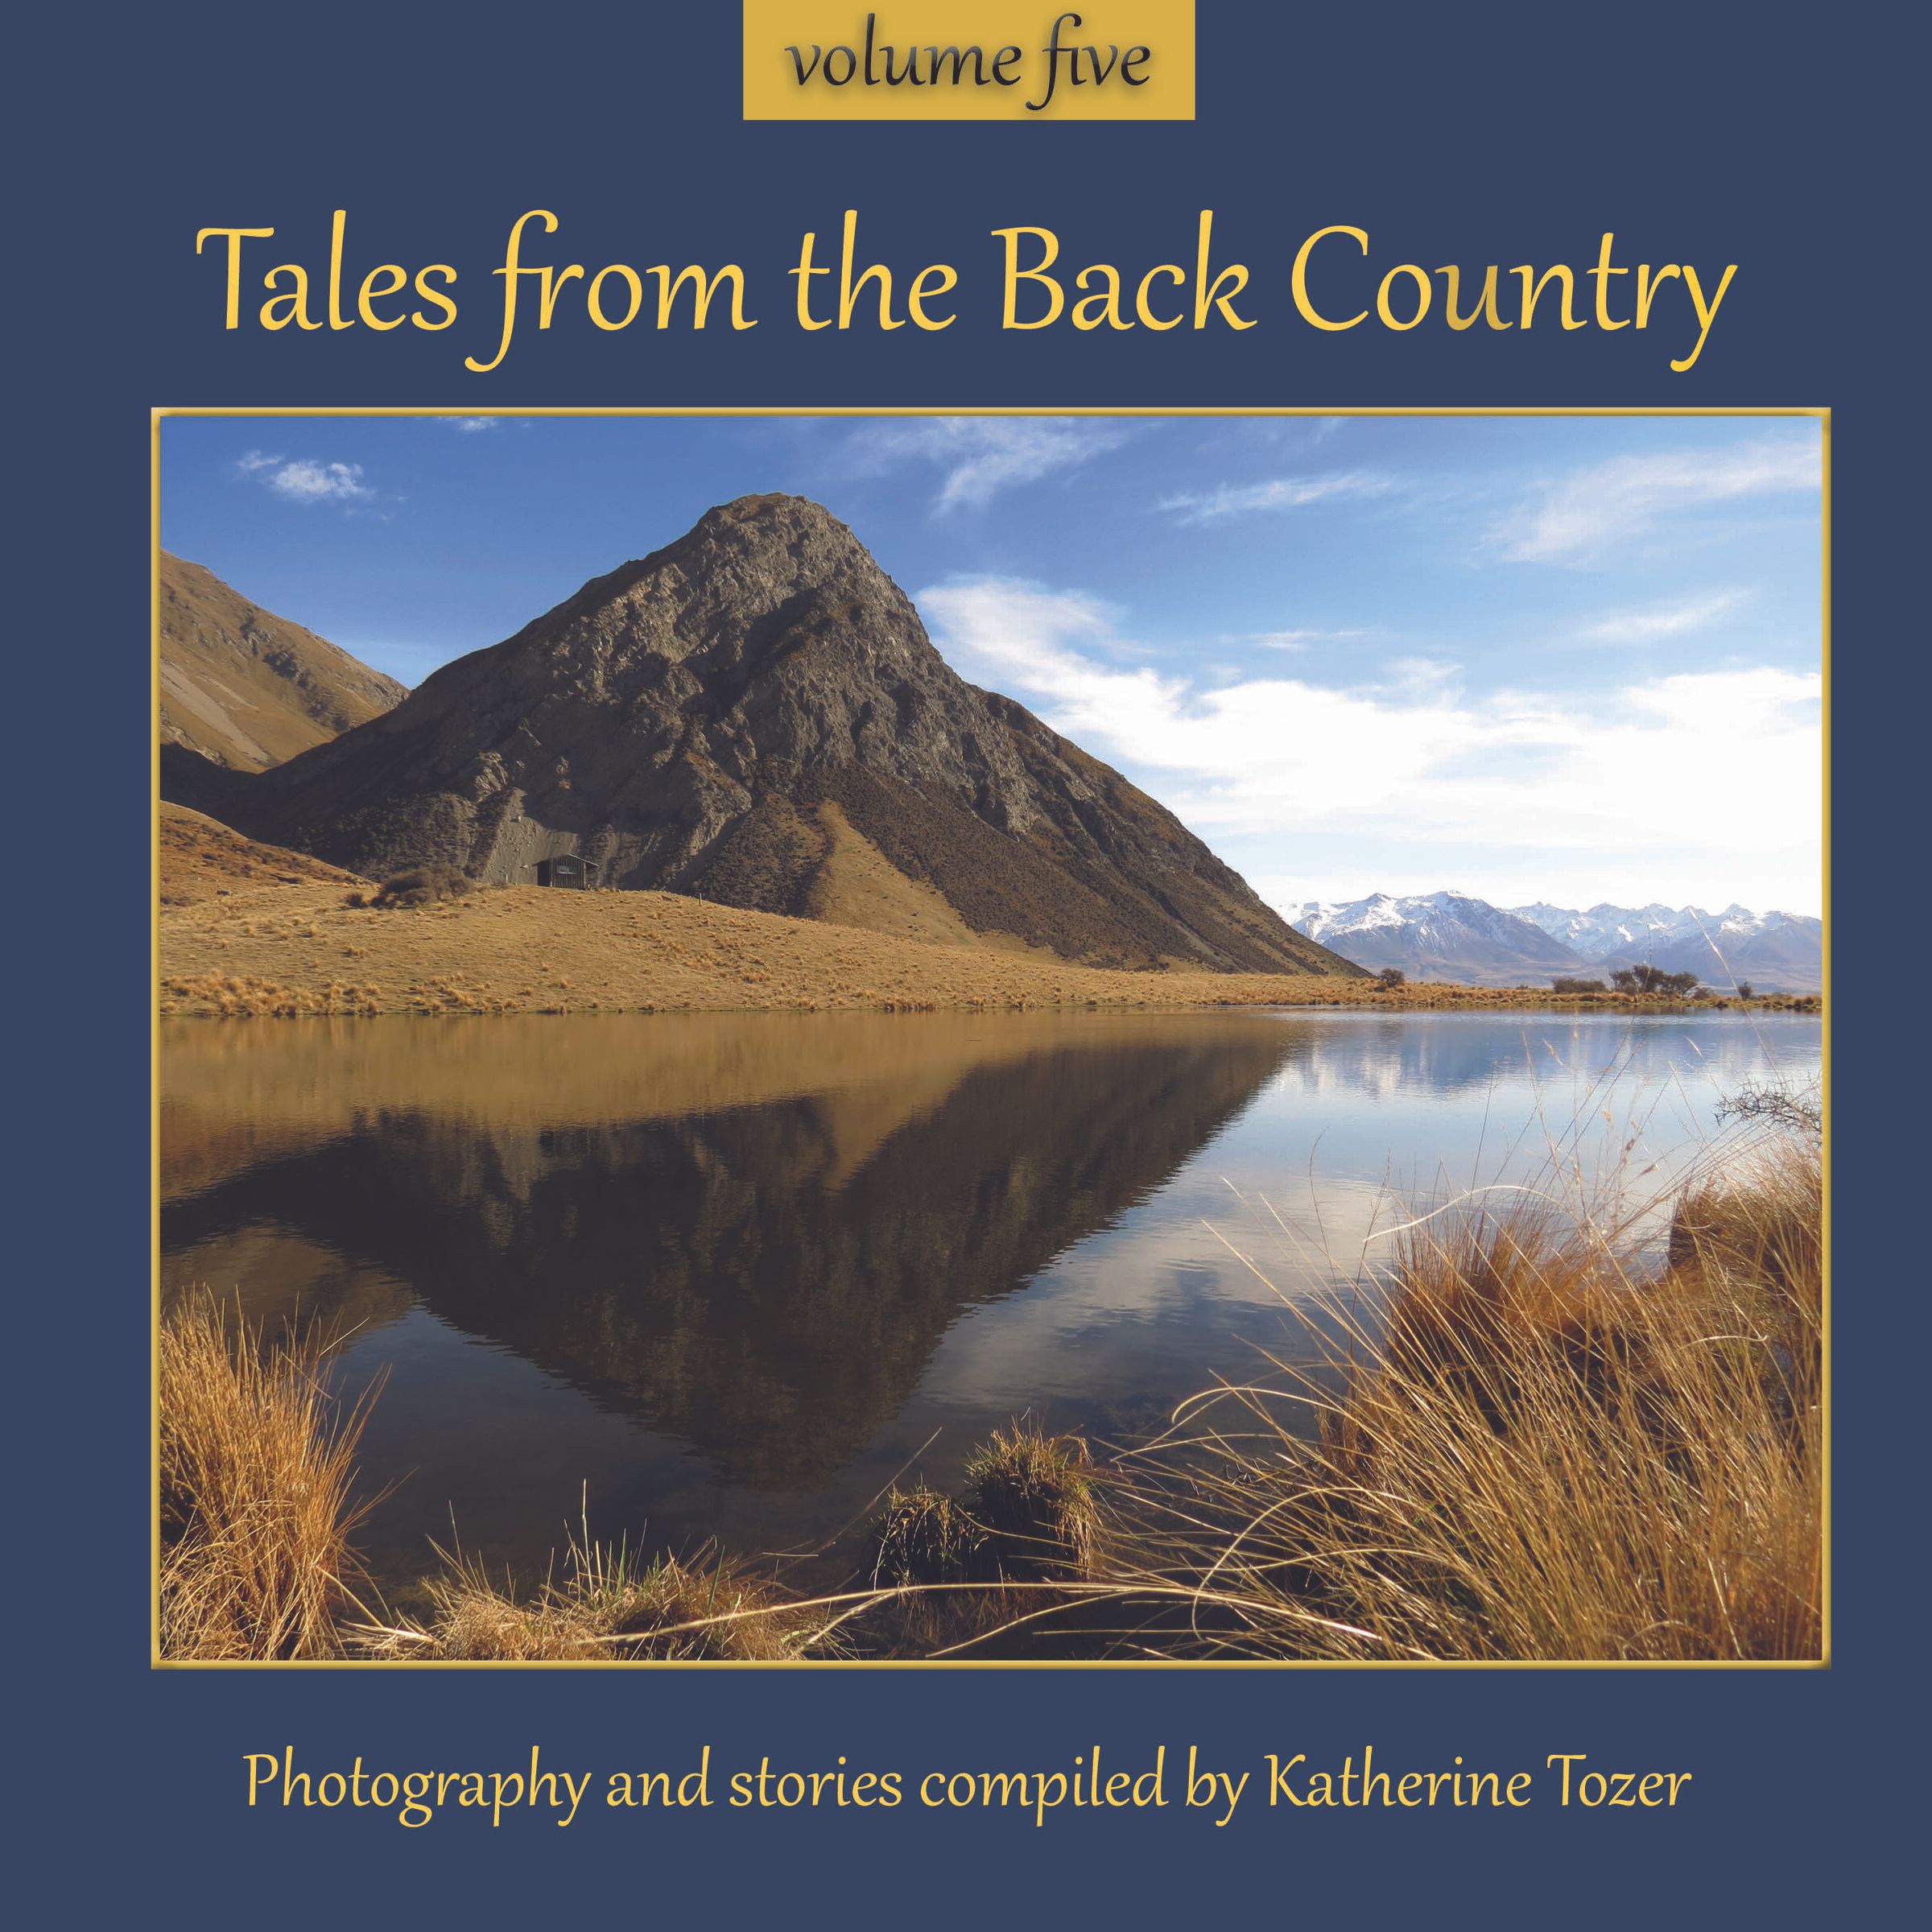 Tales from the Back Country - Volume 5